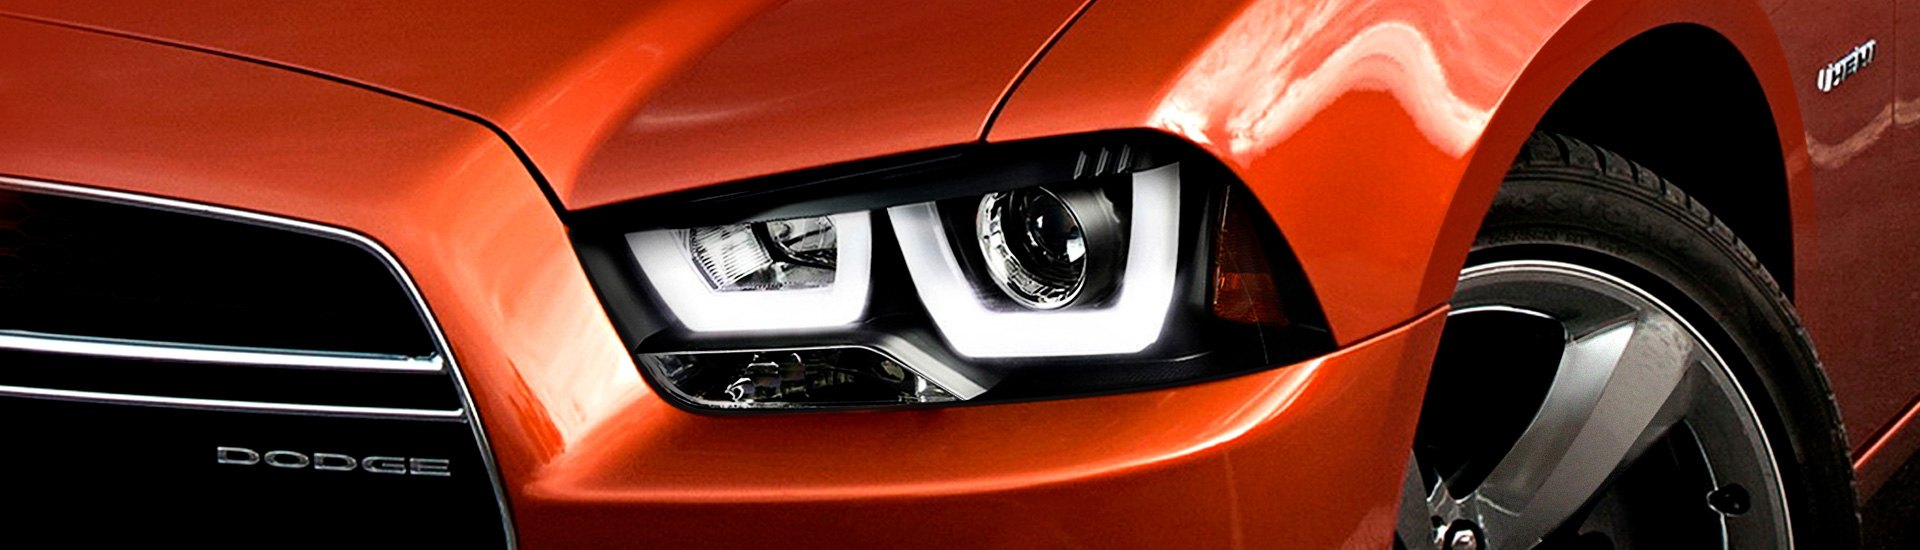 Brand-New Series Of Spec-D LED Projector Headlights For ‘11-’14 Dodge Charger 